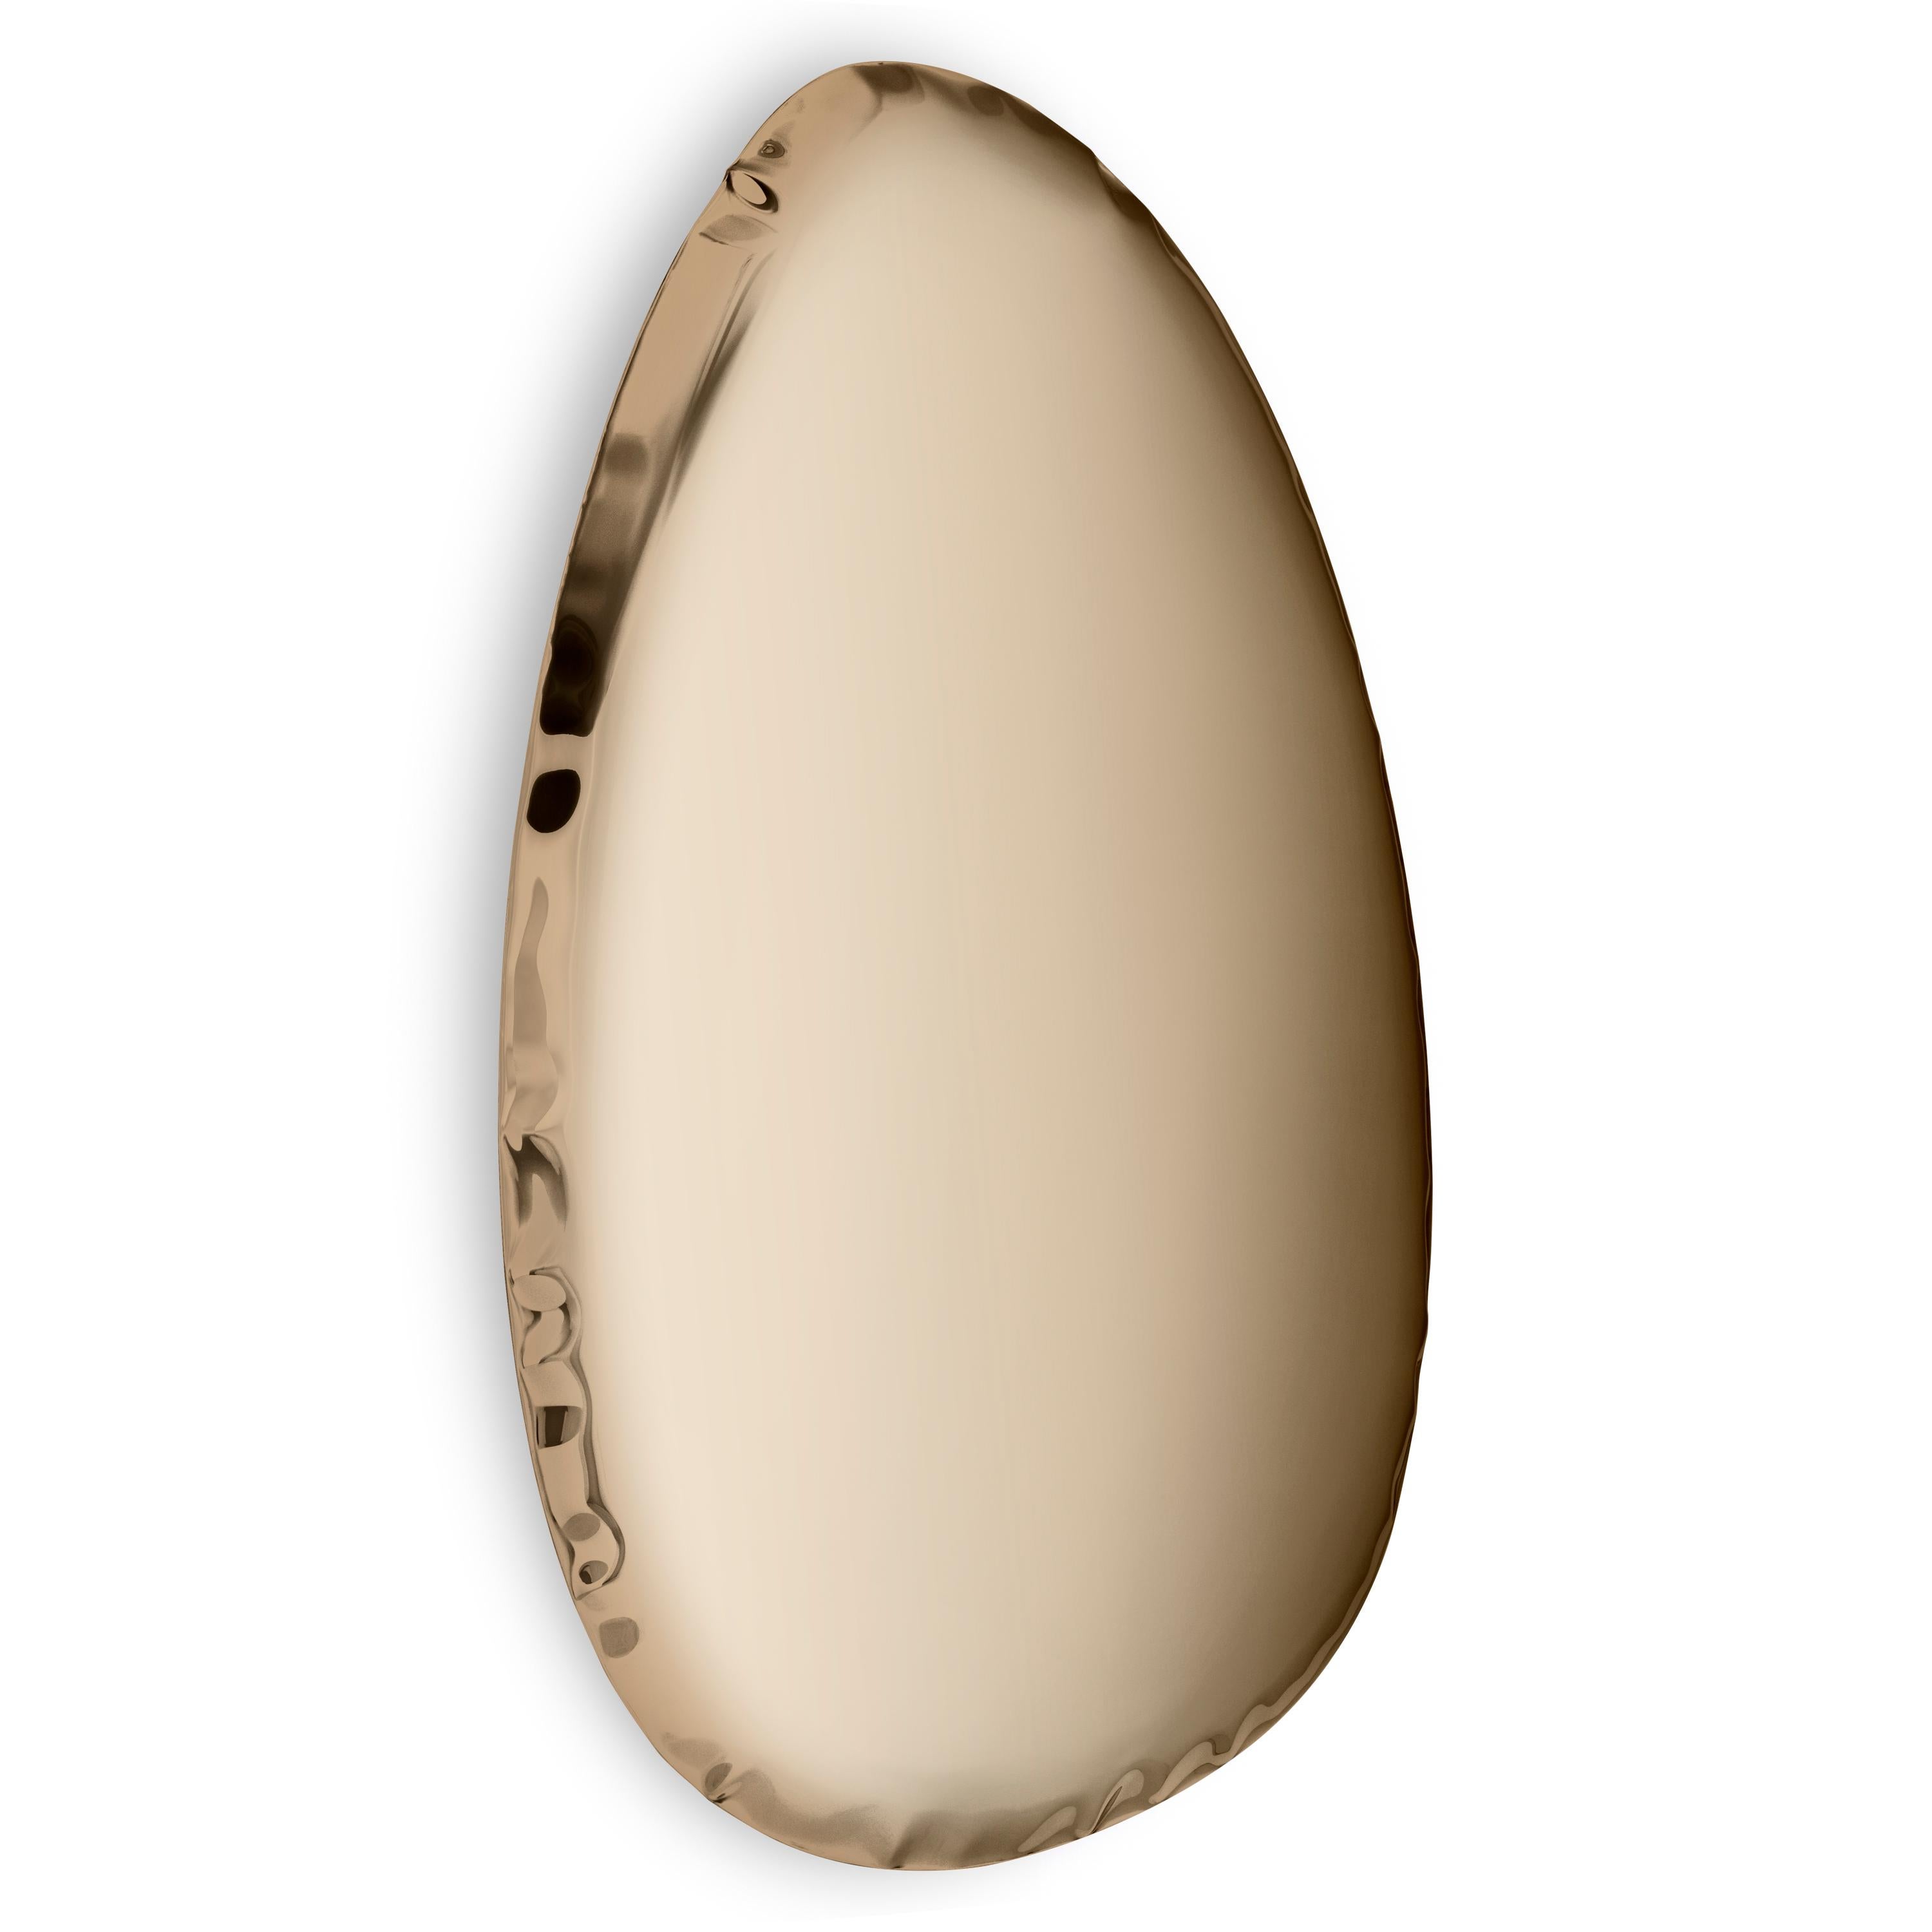 Classic gold tafla O4.5 wall mirror by Zieta
Dimensions: D 6 x W 57 x H 86 cm 
Material: stainless steel.
Finish: Classic gold. 
Available finishes: stainless steel, white matt, sapphire/emerald, sapphire, emerald, deep space blue, dark matter, red